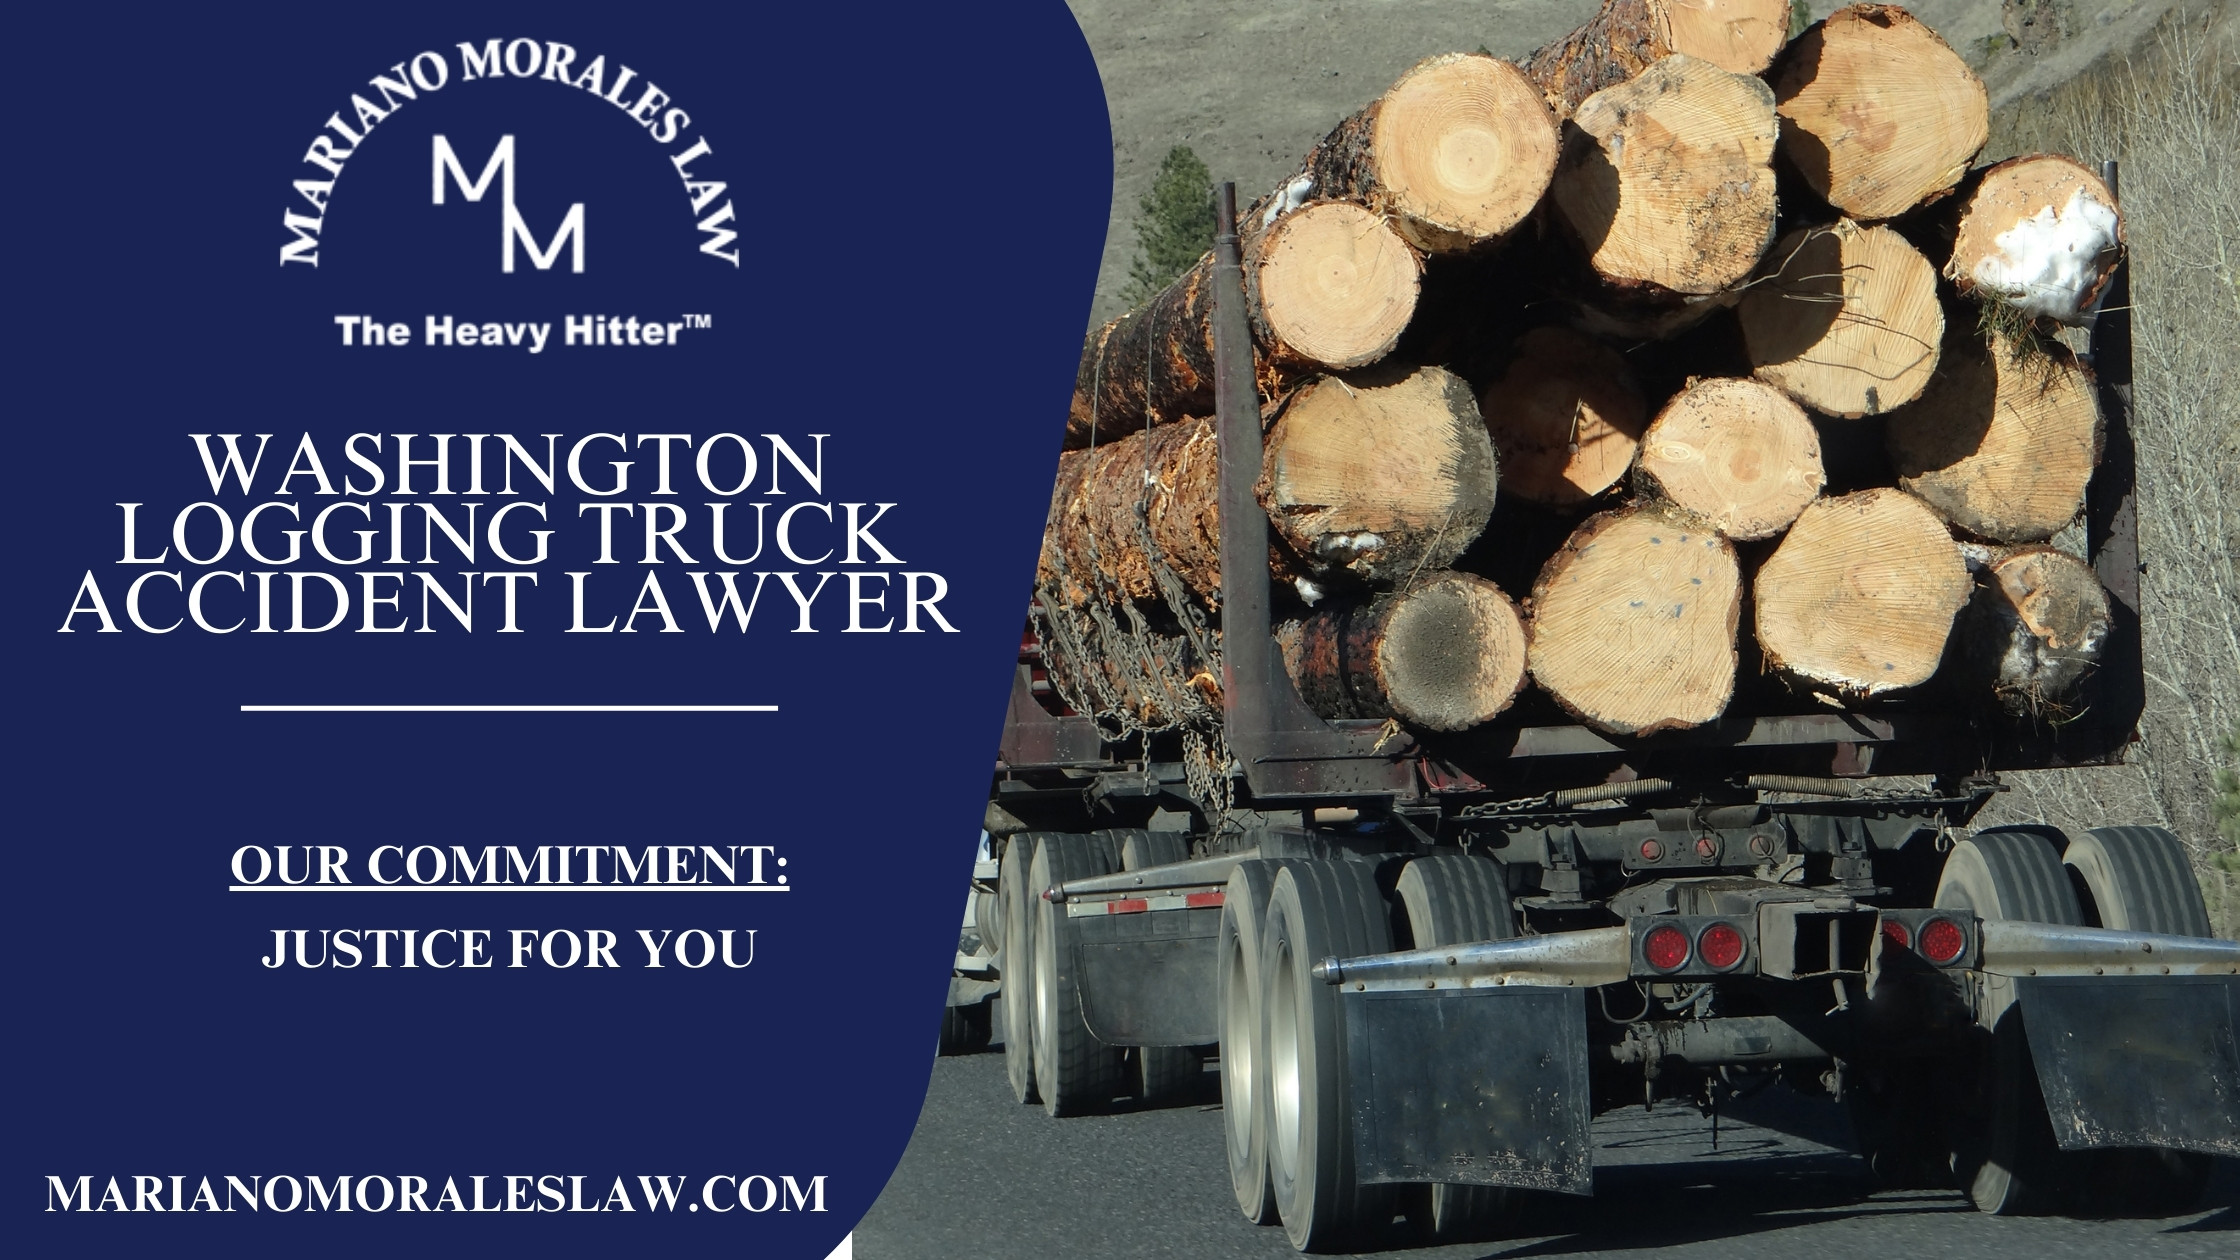 A logging truck loaded with timber, representing the focus of a Washington Logging Truck Accident Lawyer dedicated to advocating for accident victims' rights and compensation.